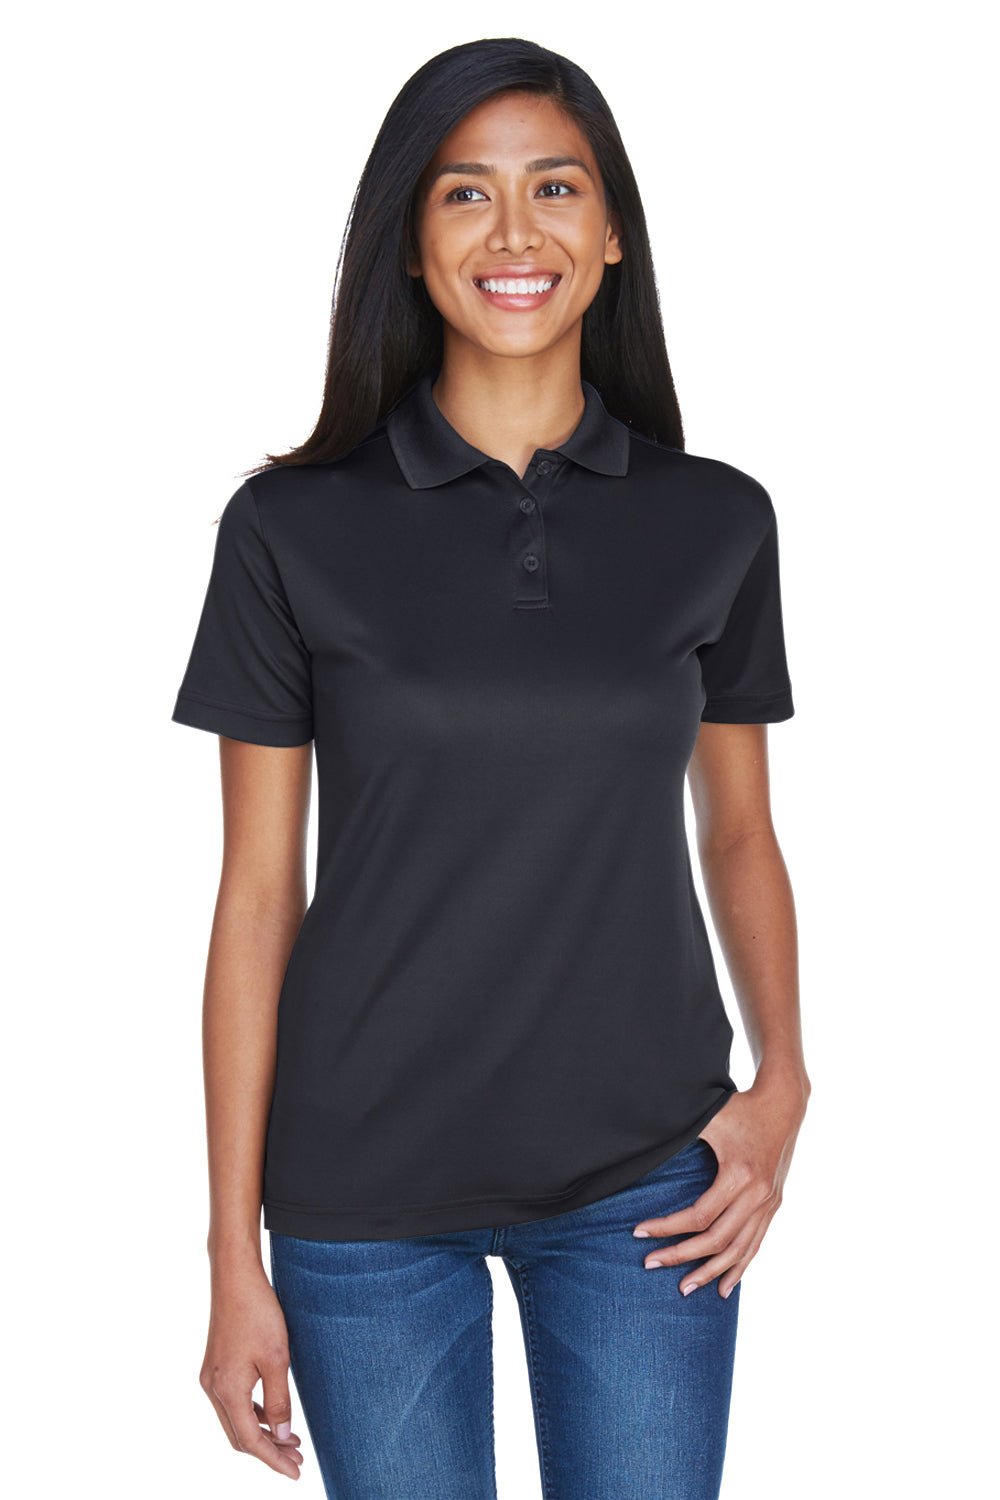 UltraClub 8404 Womens Cool & Dry Moisture Wicking Short Sleeve Polo Shirt Black Front